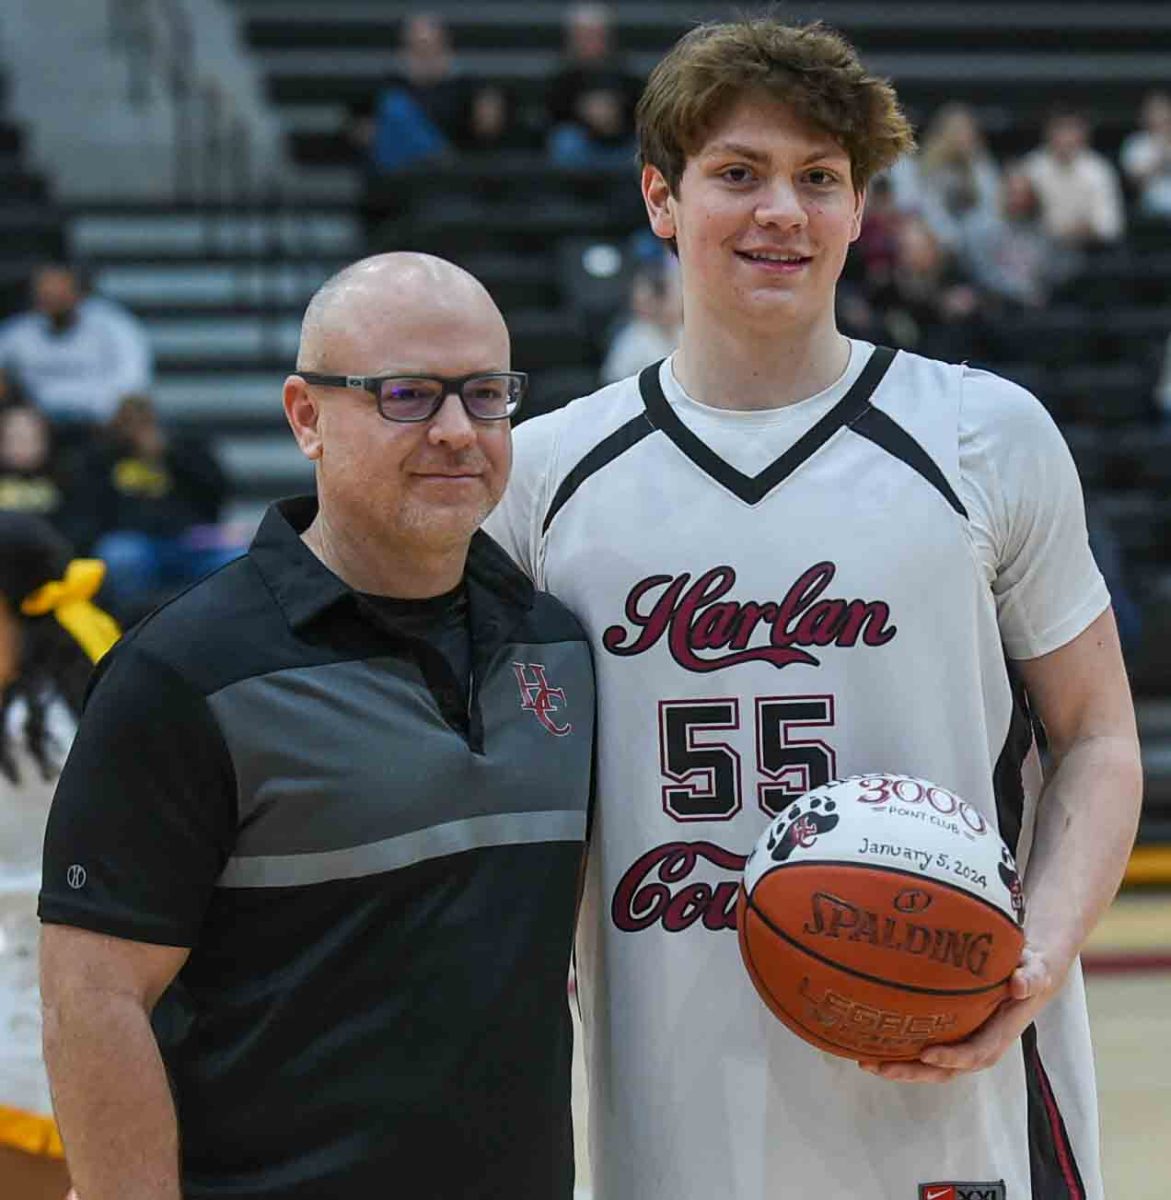 Harlan+County+senior+guard+Trent+Noah+was+honored+before+the+Bears+game+Friday+against+Middlesboro+for+reaching+the+3%2C000-point+plateau+in+a+win+over+Corbin+on+Jan.+5.+Noah+has+scored+3%2C128+points+through+Saturdays+game+against+Woodford+County+and+needs+238+points+to+break+Charles+Thomas+county+record.+The+Bears+have+10+regular+season+games+left%2C+which+means+hes+on+pace+to+break+the+record+before+tournament+play+begins.